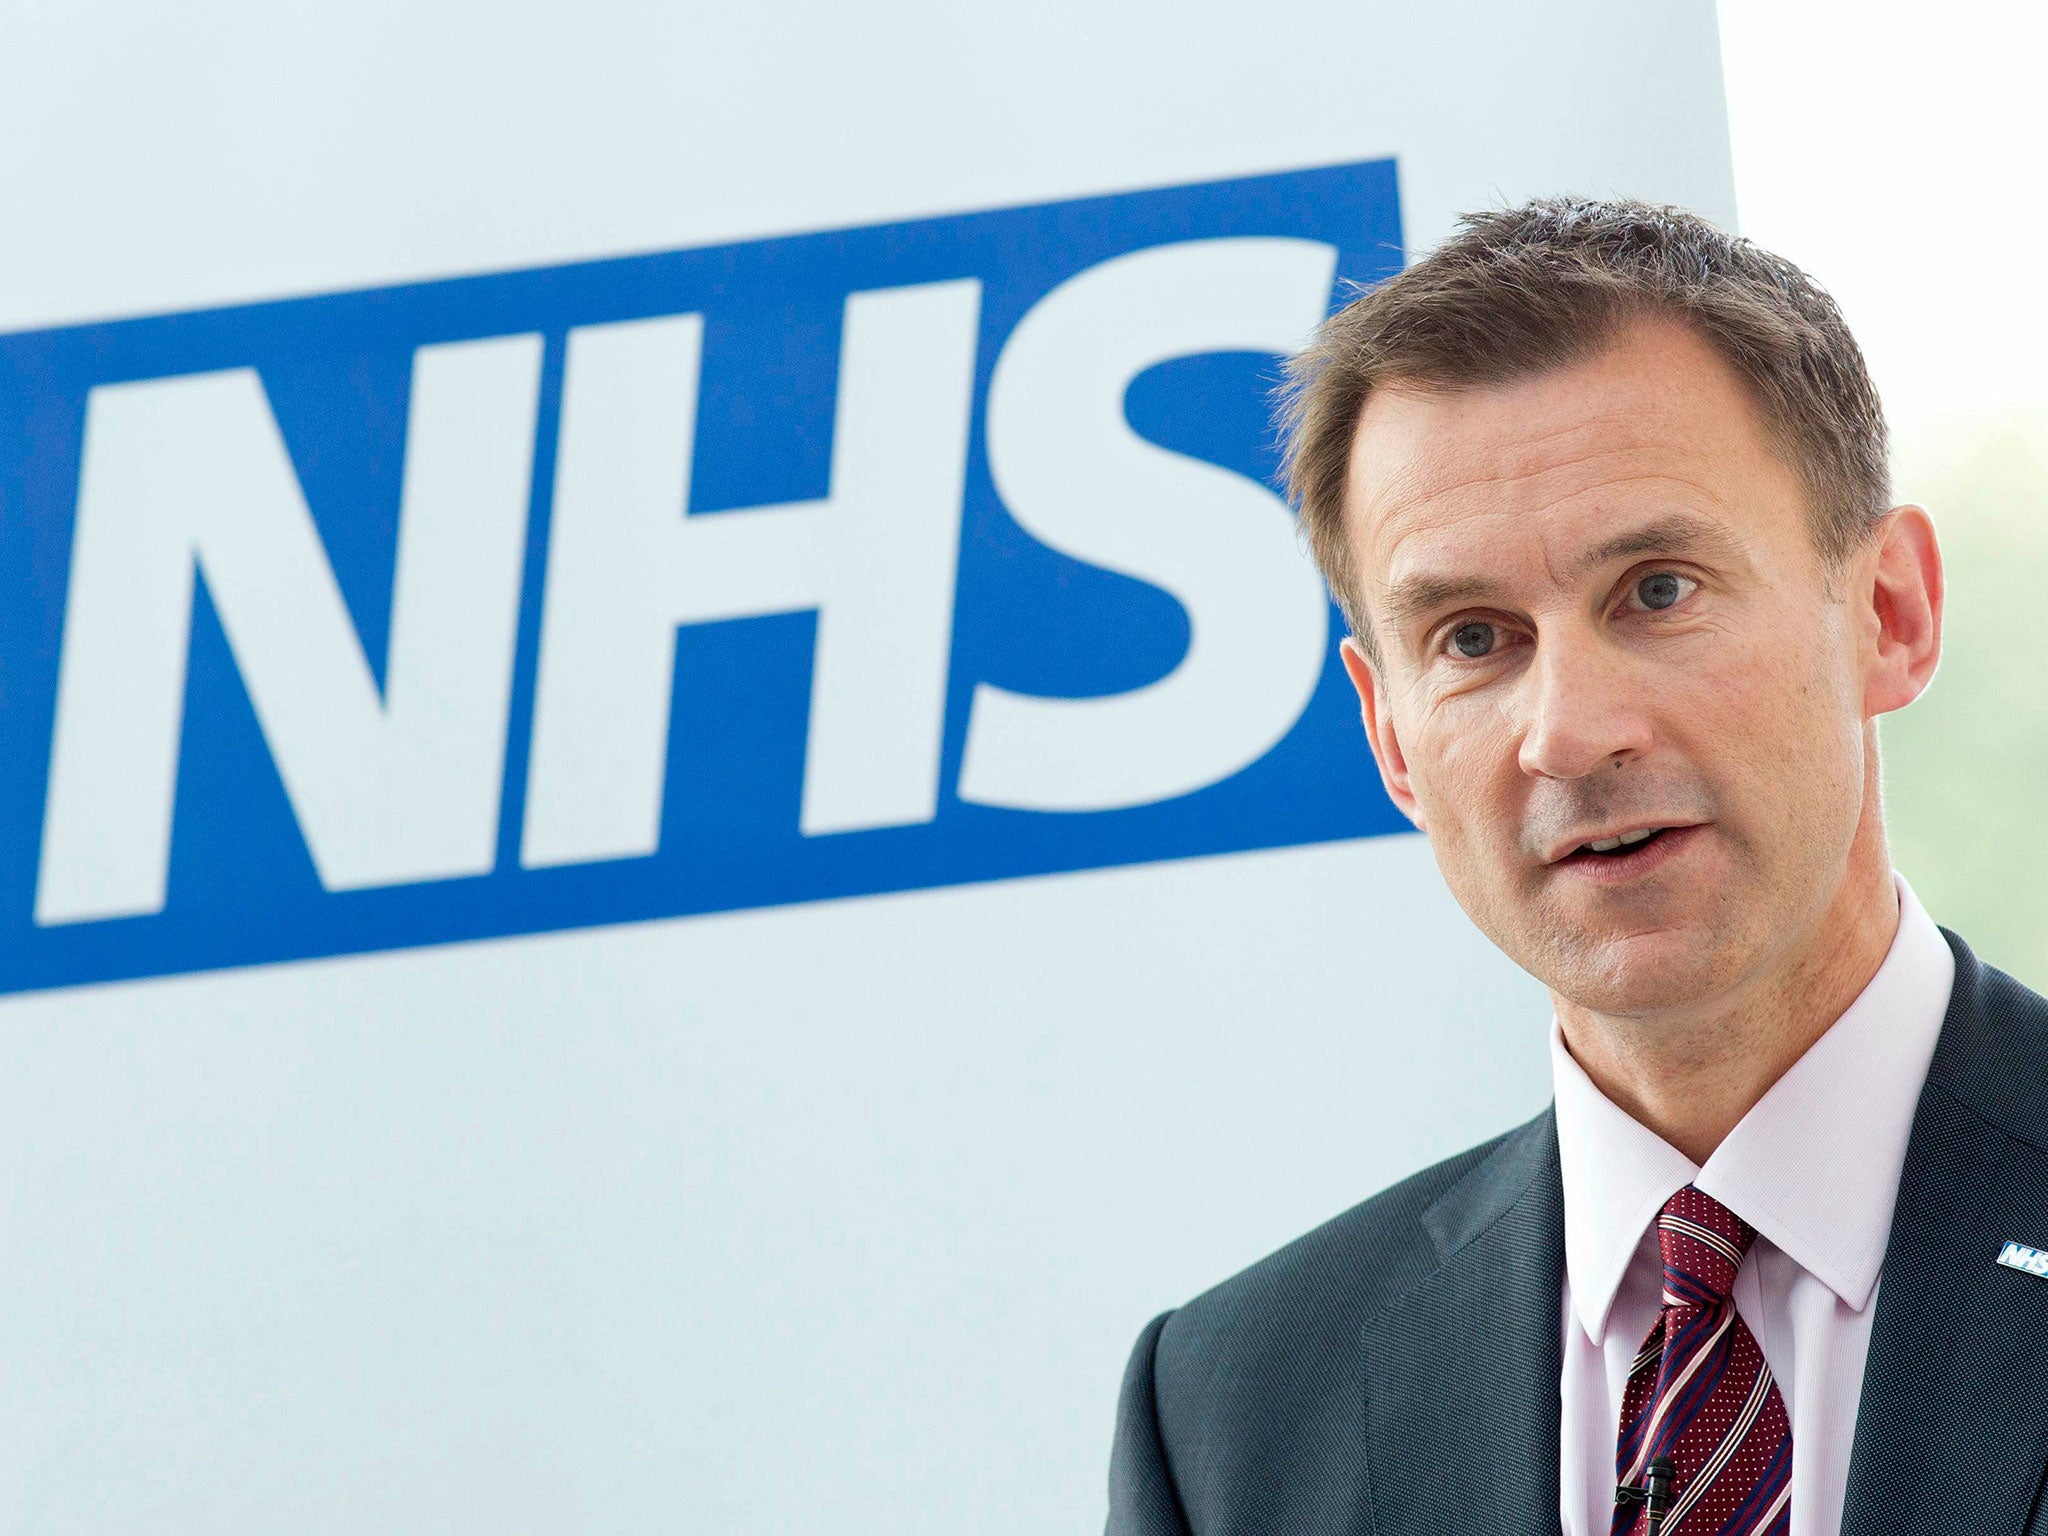 Jeremy Hunt has admitted to concerns about the fees being charged to park at some hospitals